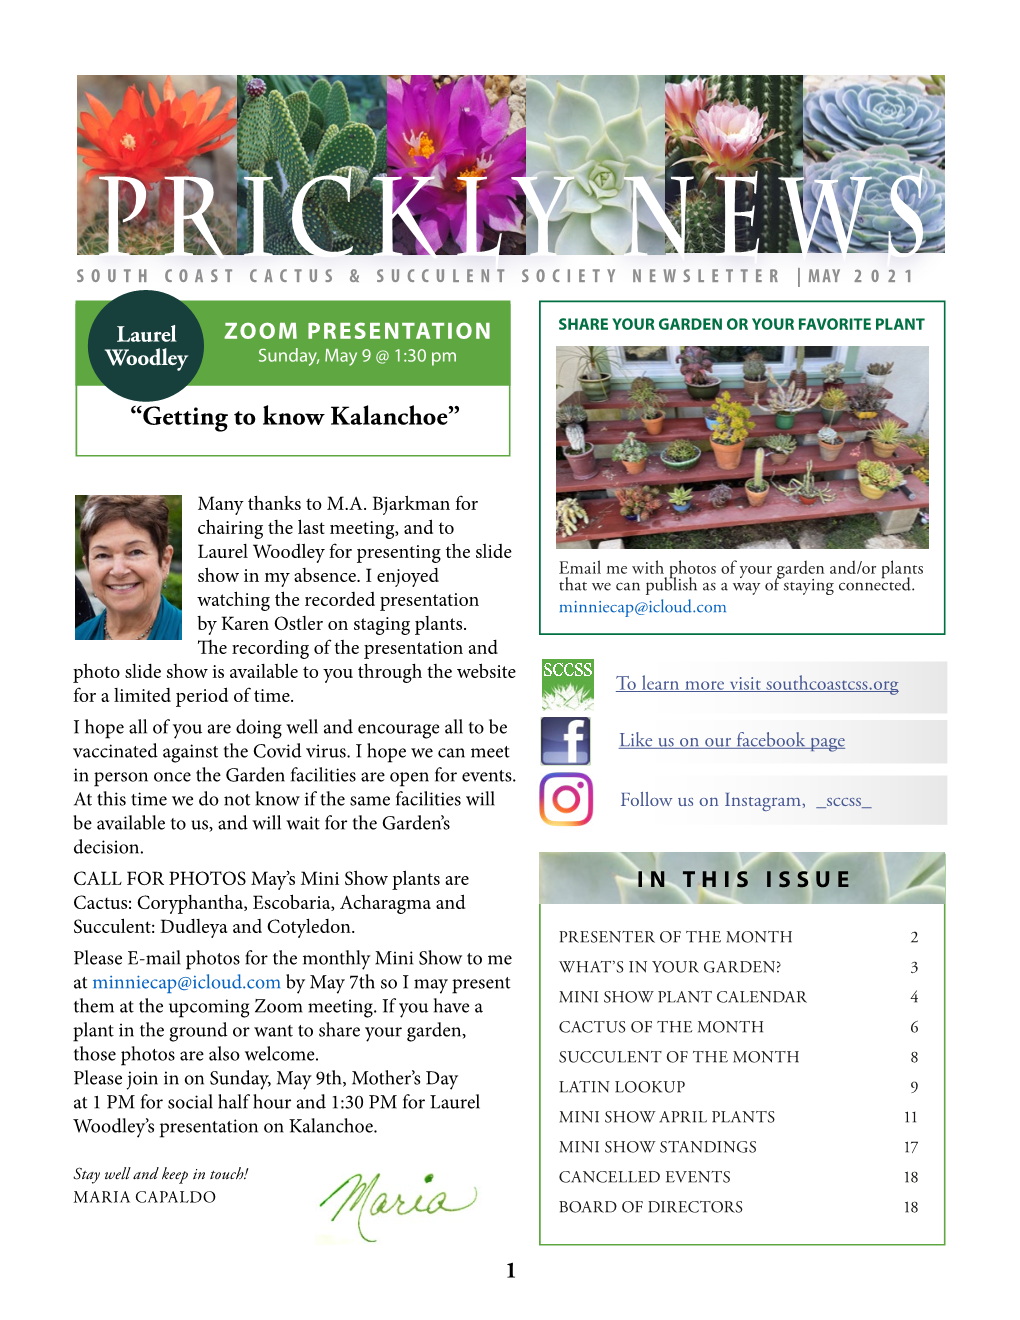 Prickly News South Coast Cactus & Succulent Society Newsletter | May 2021